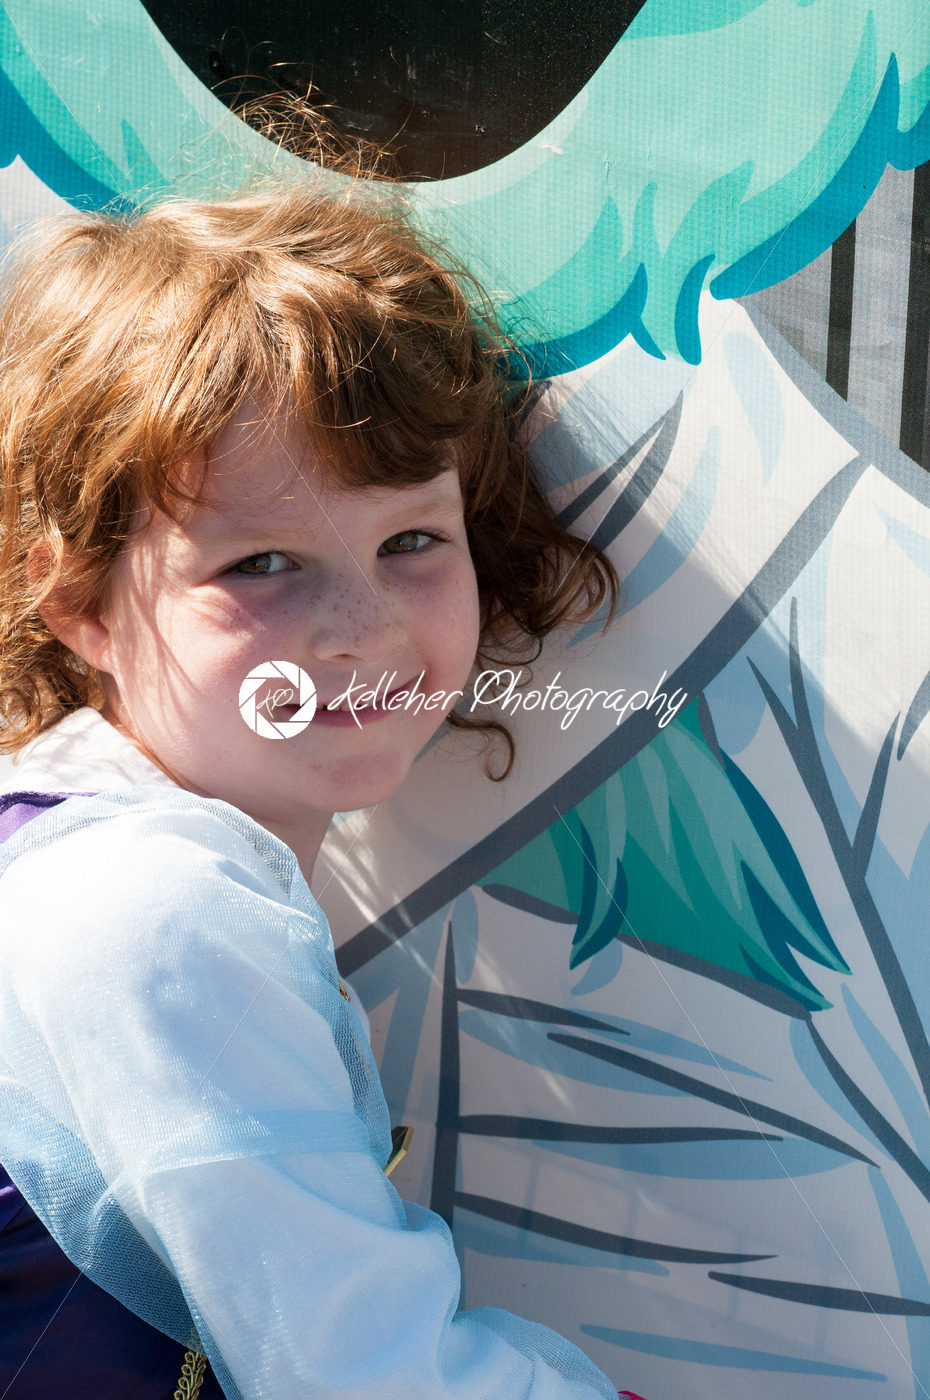 Close up Portrait of young girl outside - Kelleher Photography Store